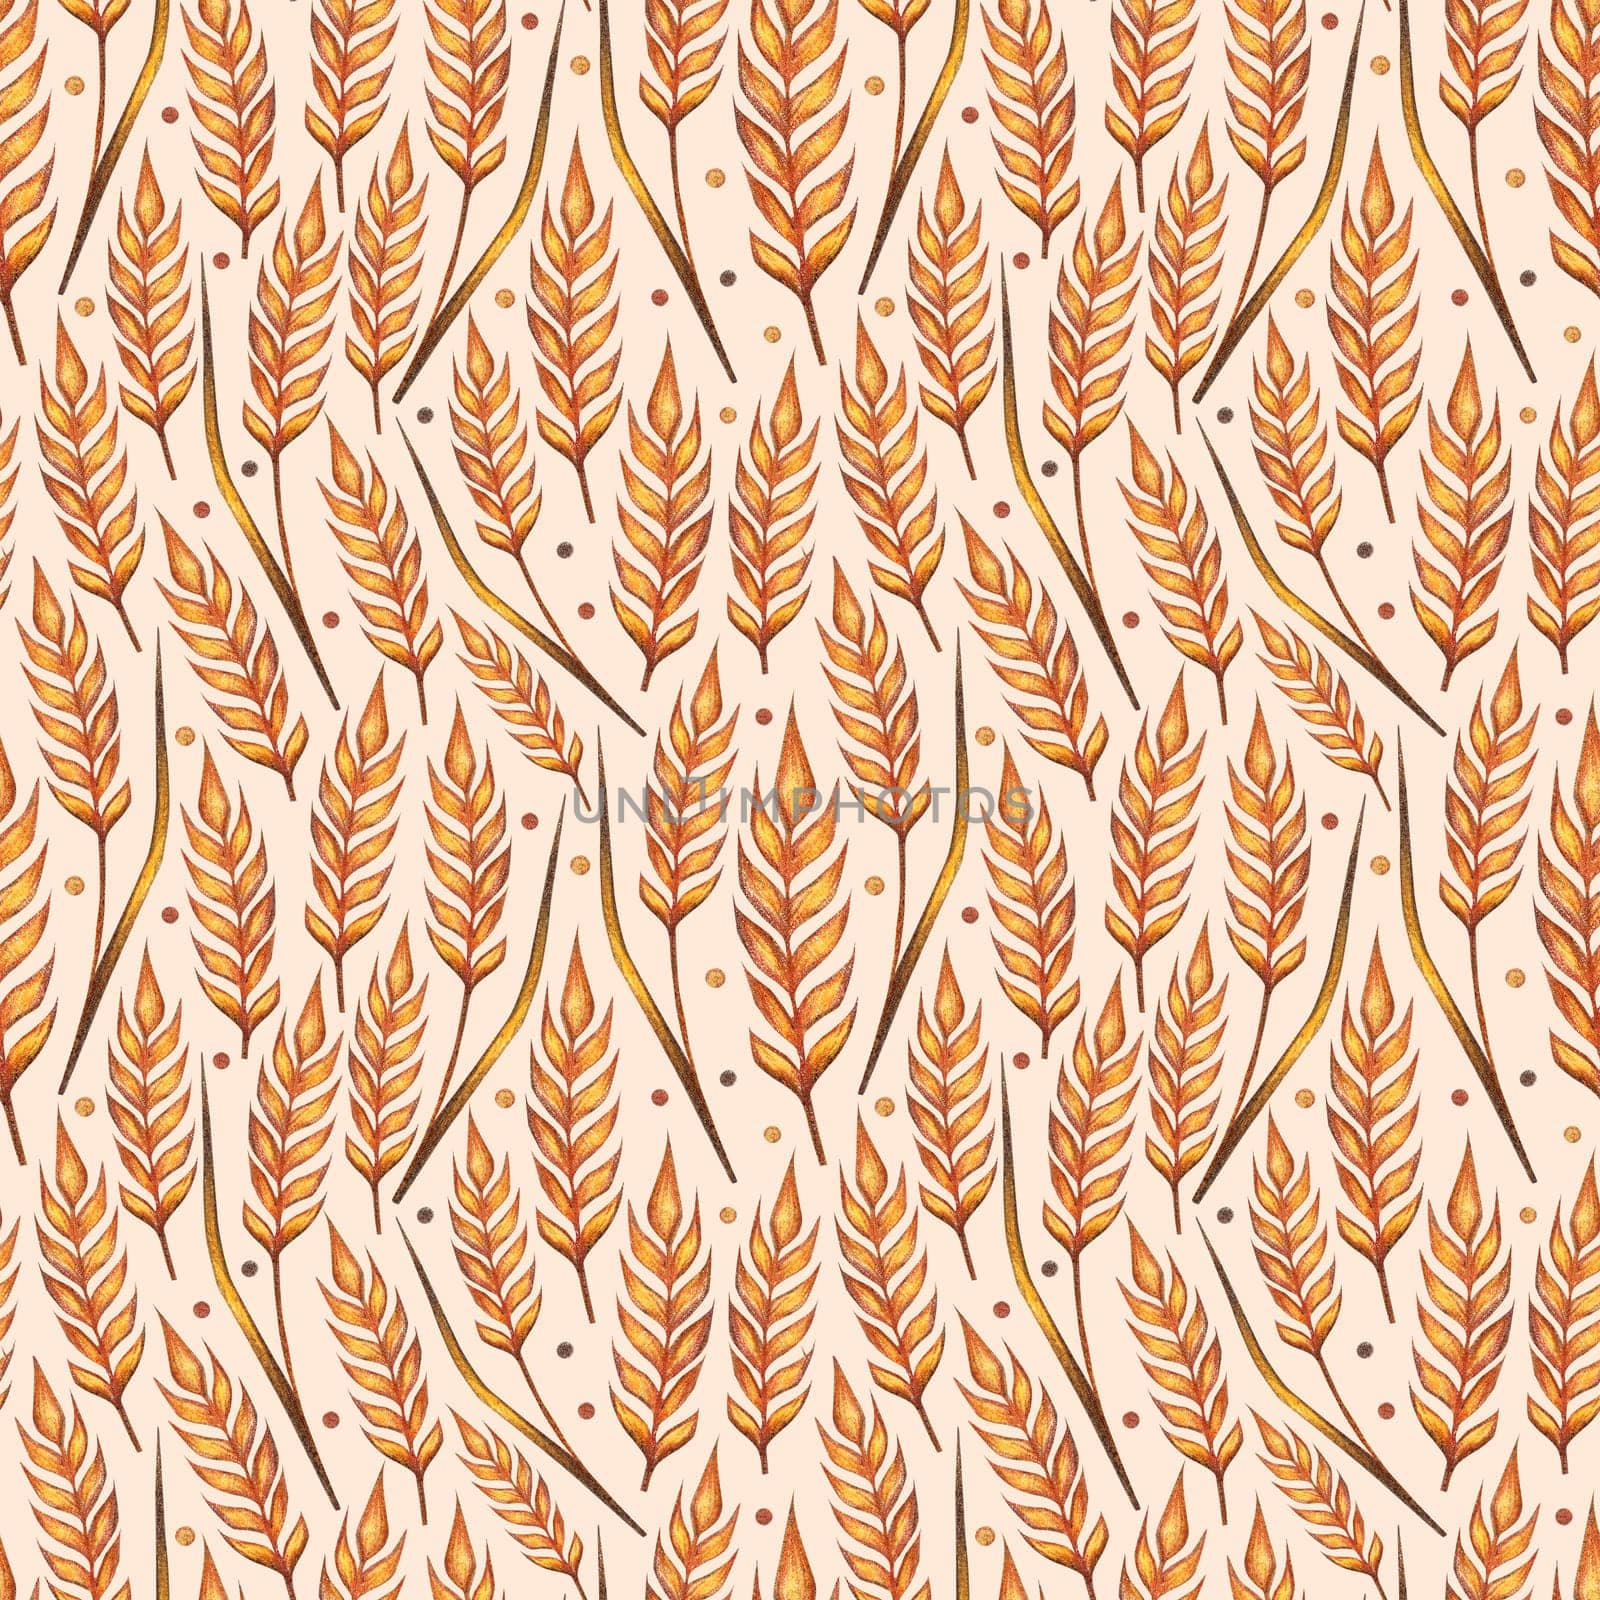 Ear of wheat watercolor seamless pattern. Hand drawn sketched illustration. Concept for agriculture, organic cereal products, harvesting grain, bakery, healthy food.